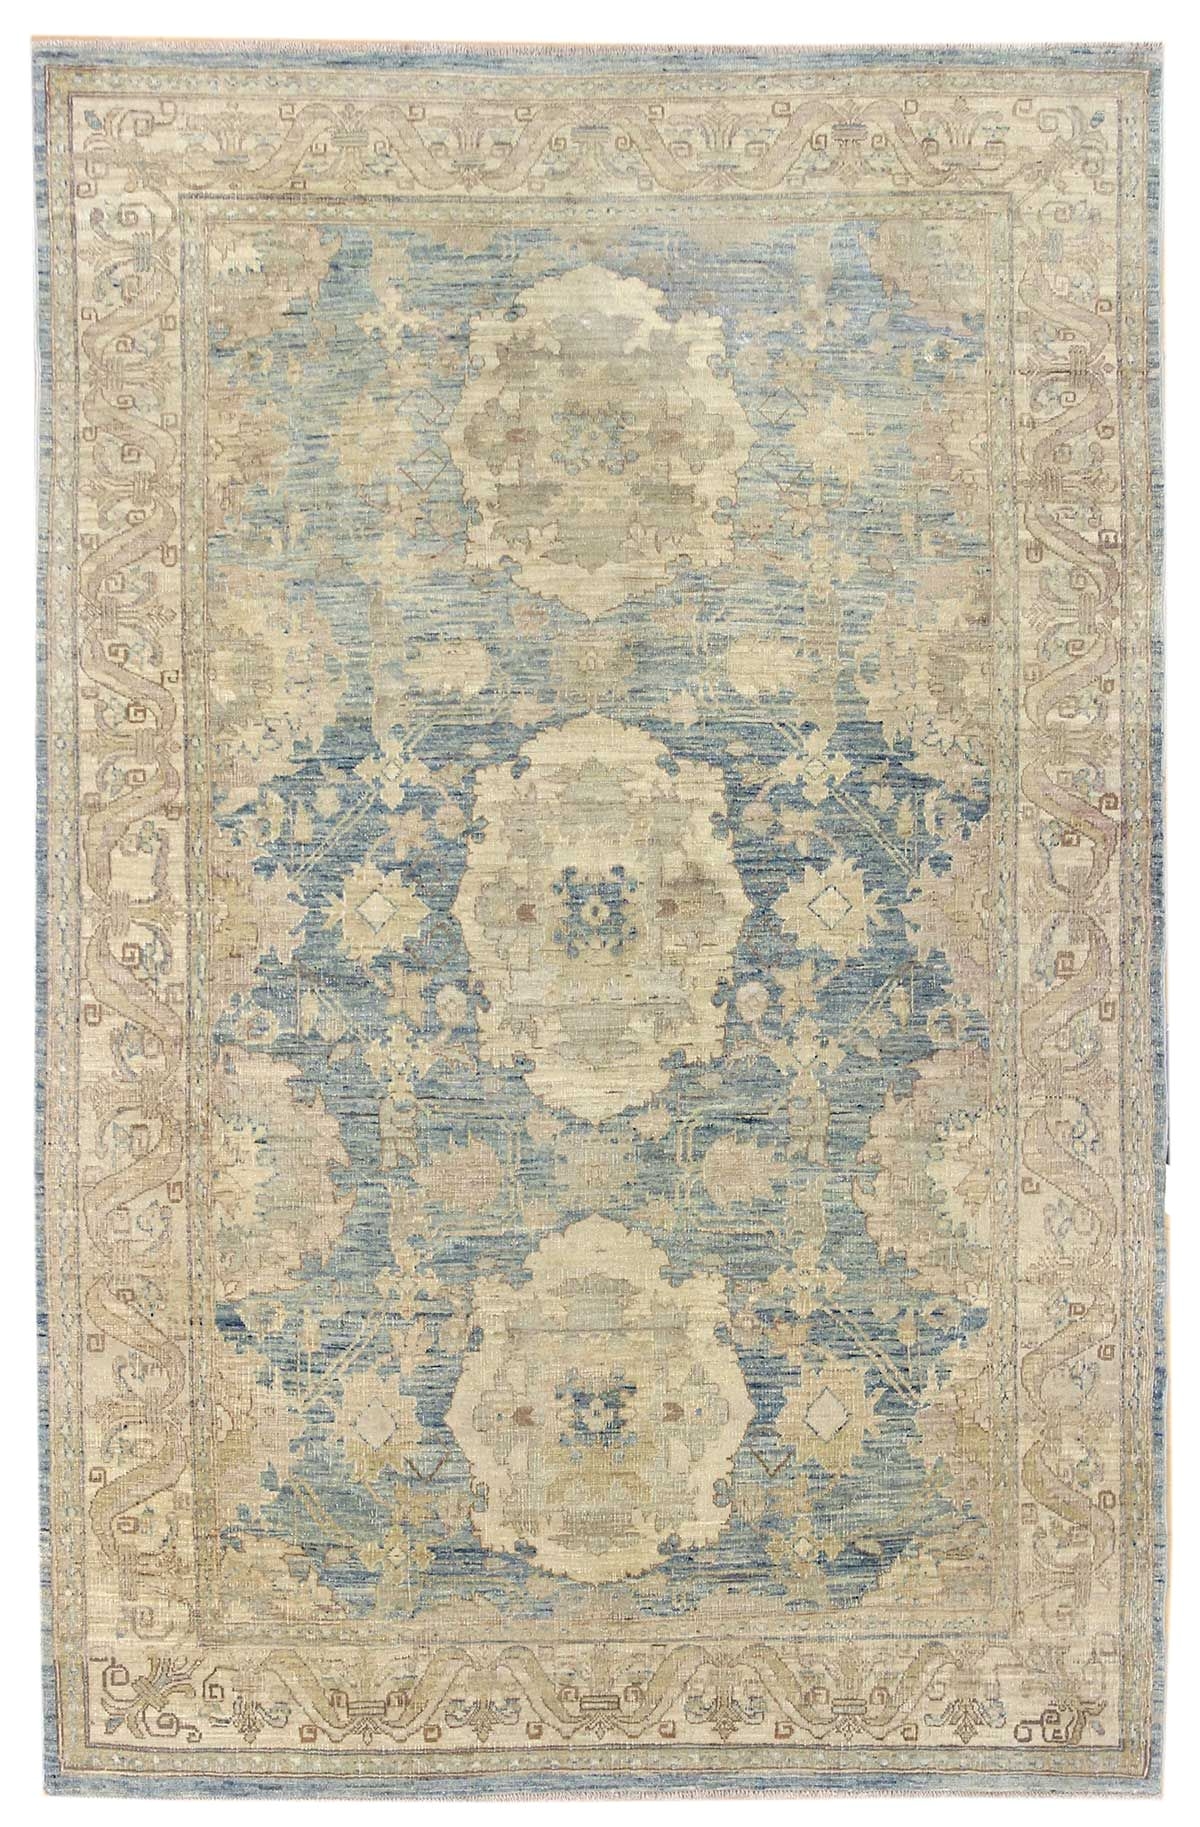 area rugs 5x7 and smaller gallery tabriz design rug hand knotted in afghanistan size 4 feet 5 inch es x 6 feet 8 inch es